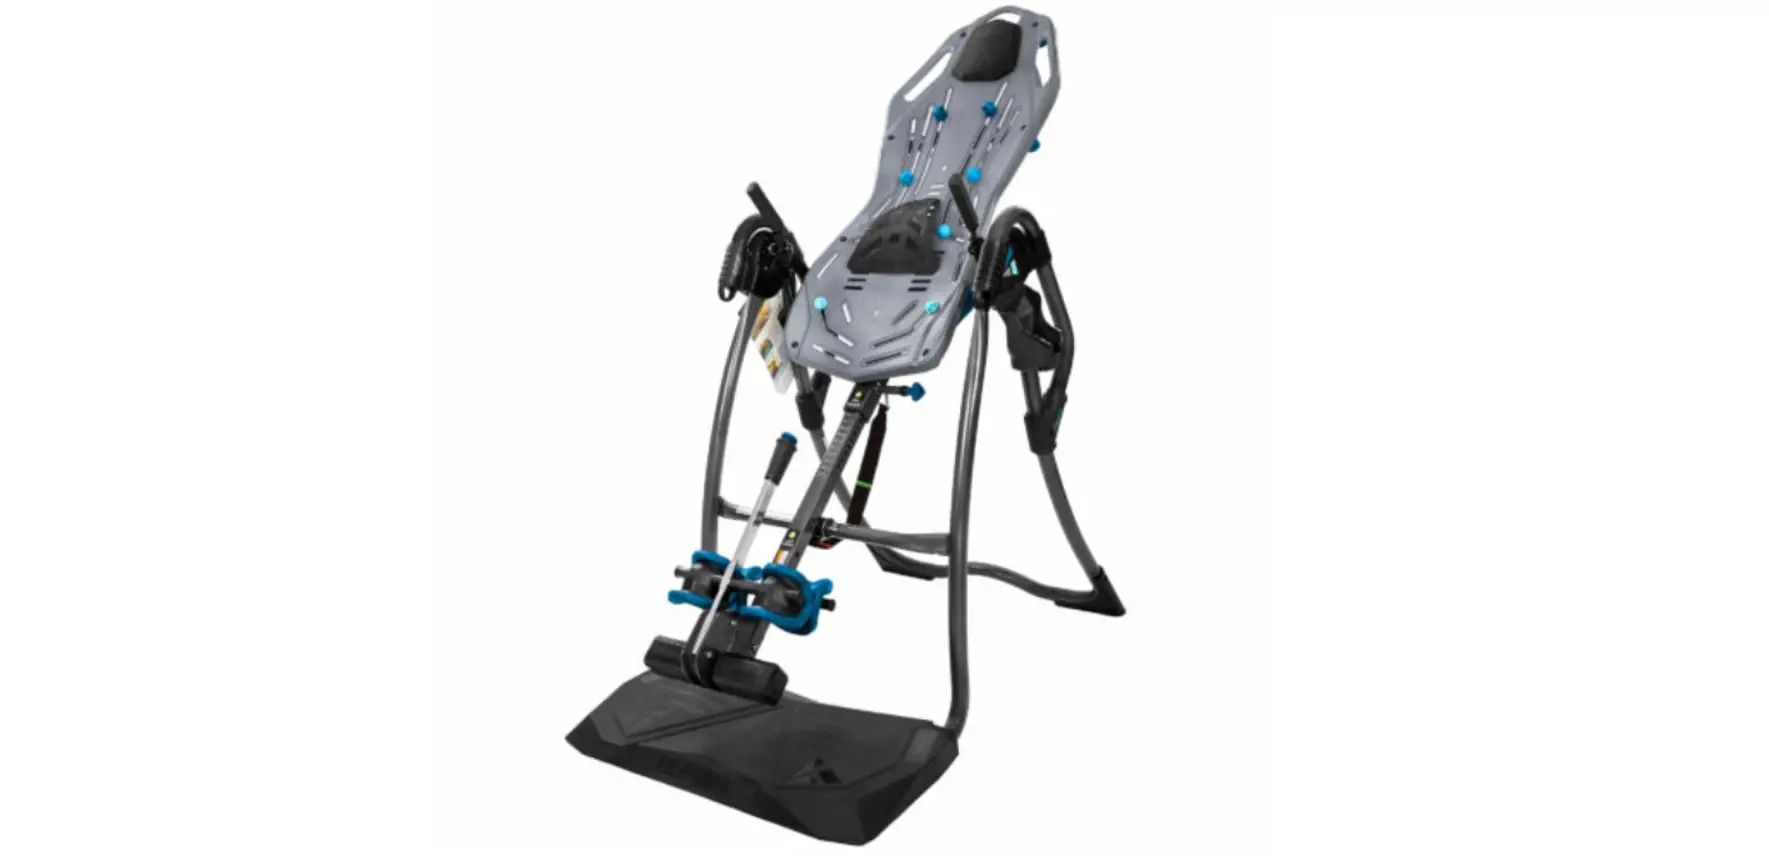 FitSpine LX9 Inversion Table